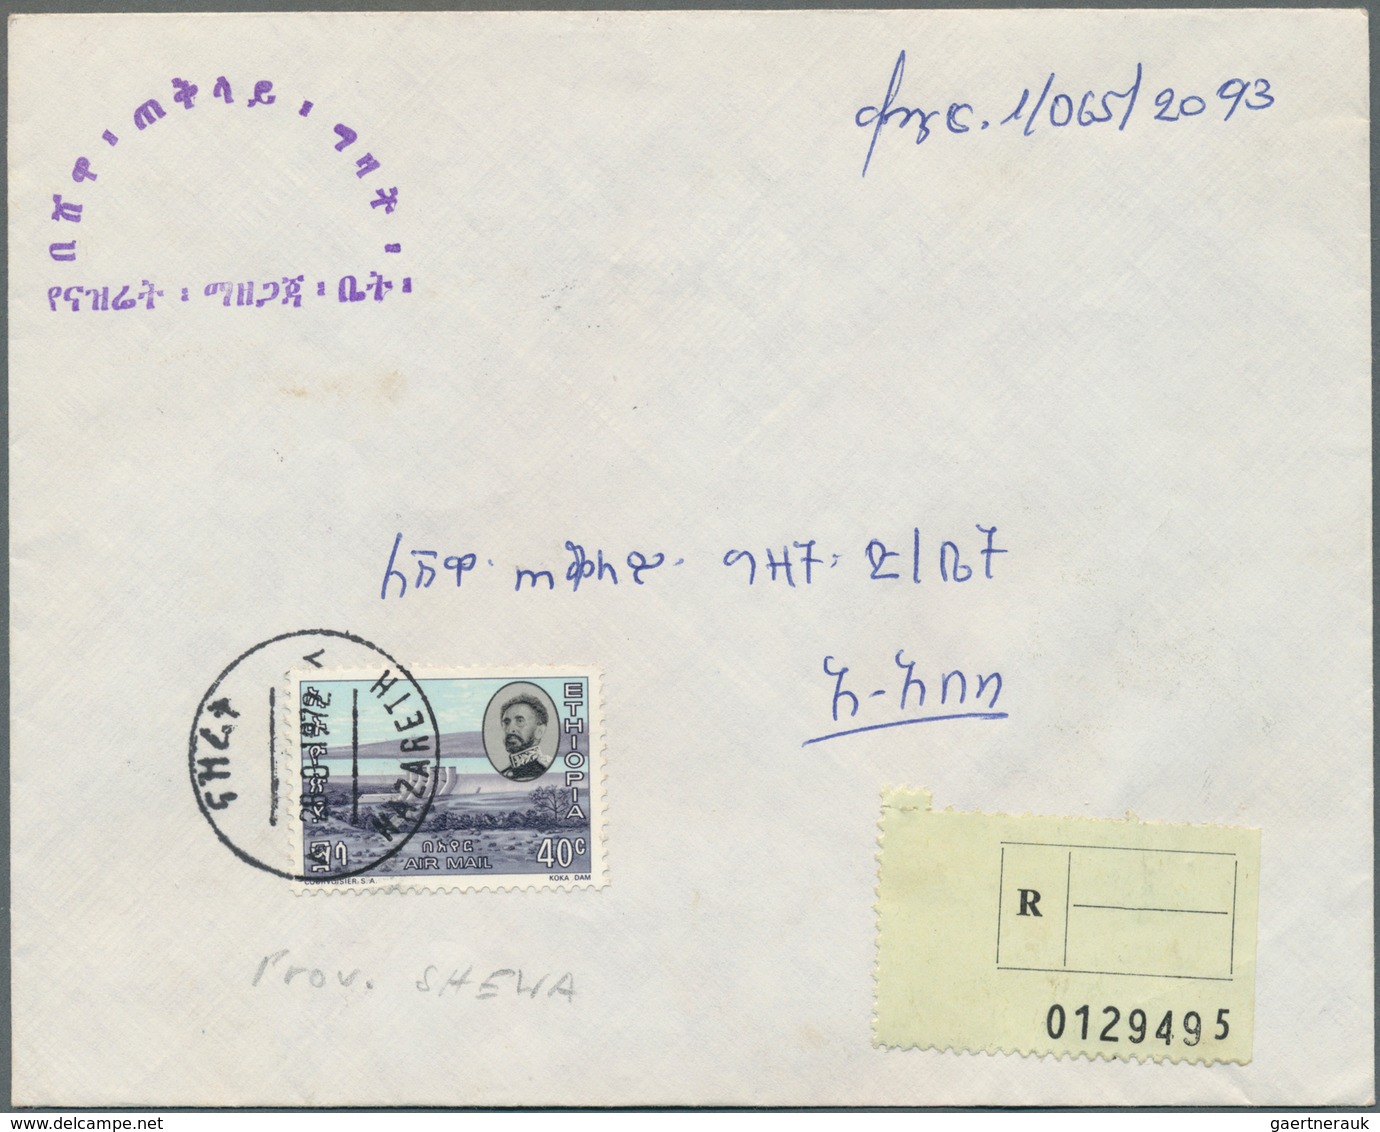 Äthiopien: 1921/73, covers used foreign (7 inc. one ppc) or inland (14, mostly registered inc. expre